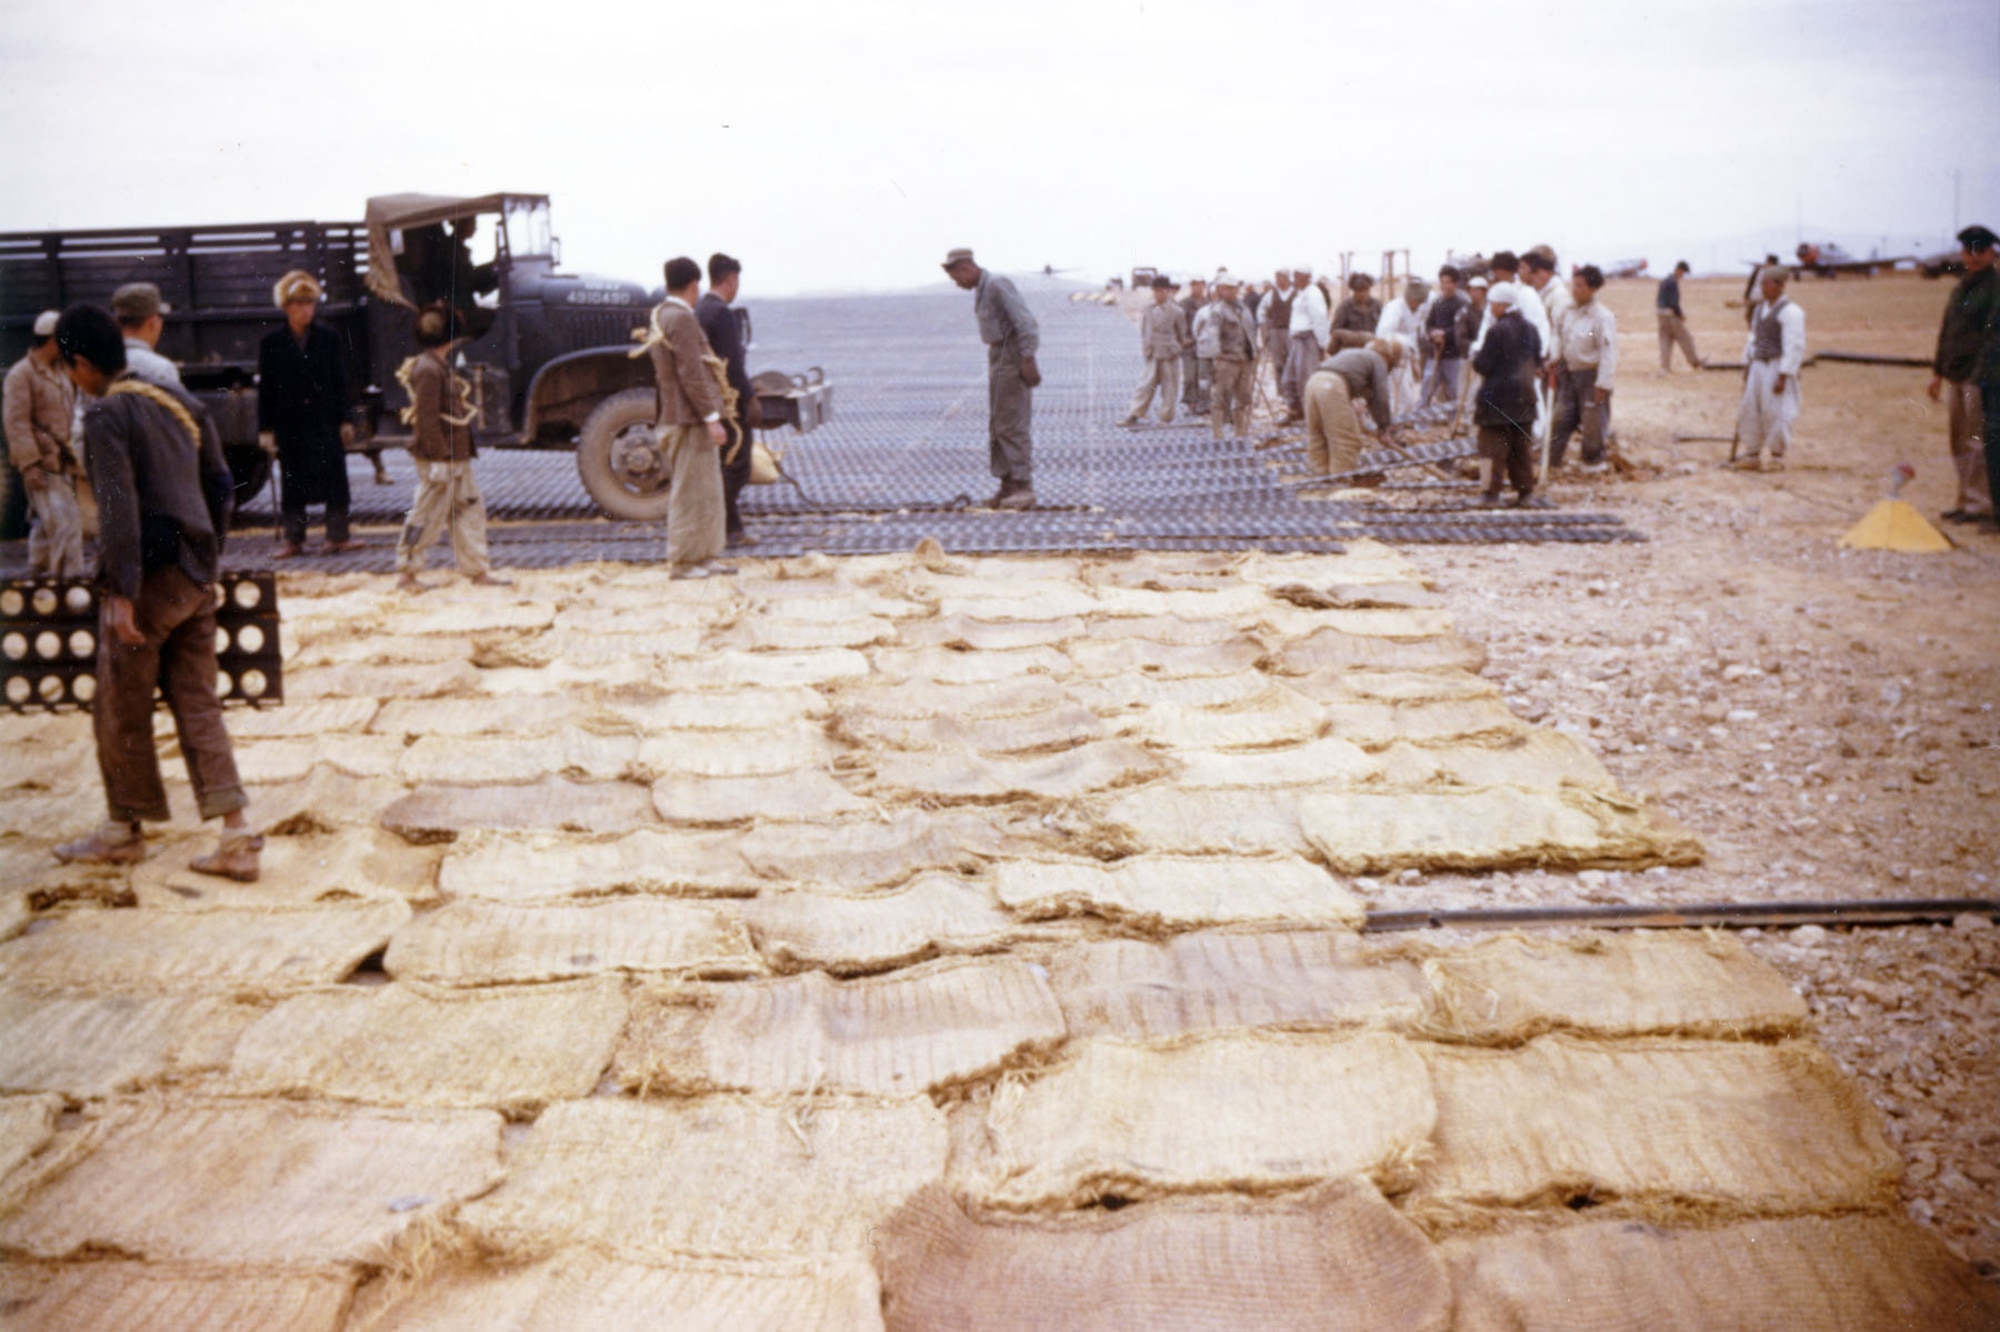 Most runways at Korean bases were made of “temporary” PSP (Pierced Steel Planking) that required constant maintenance. Here, the runway at K-6 (Pyongtaek) is being lengthened with PSP laid on top of rice bags. (U.S. Air Force photo)